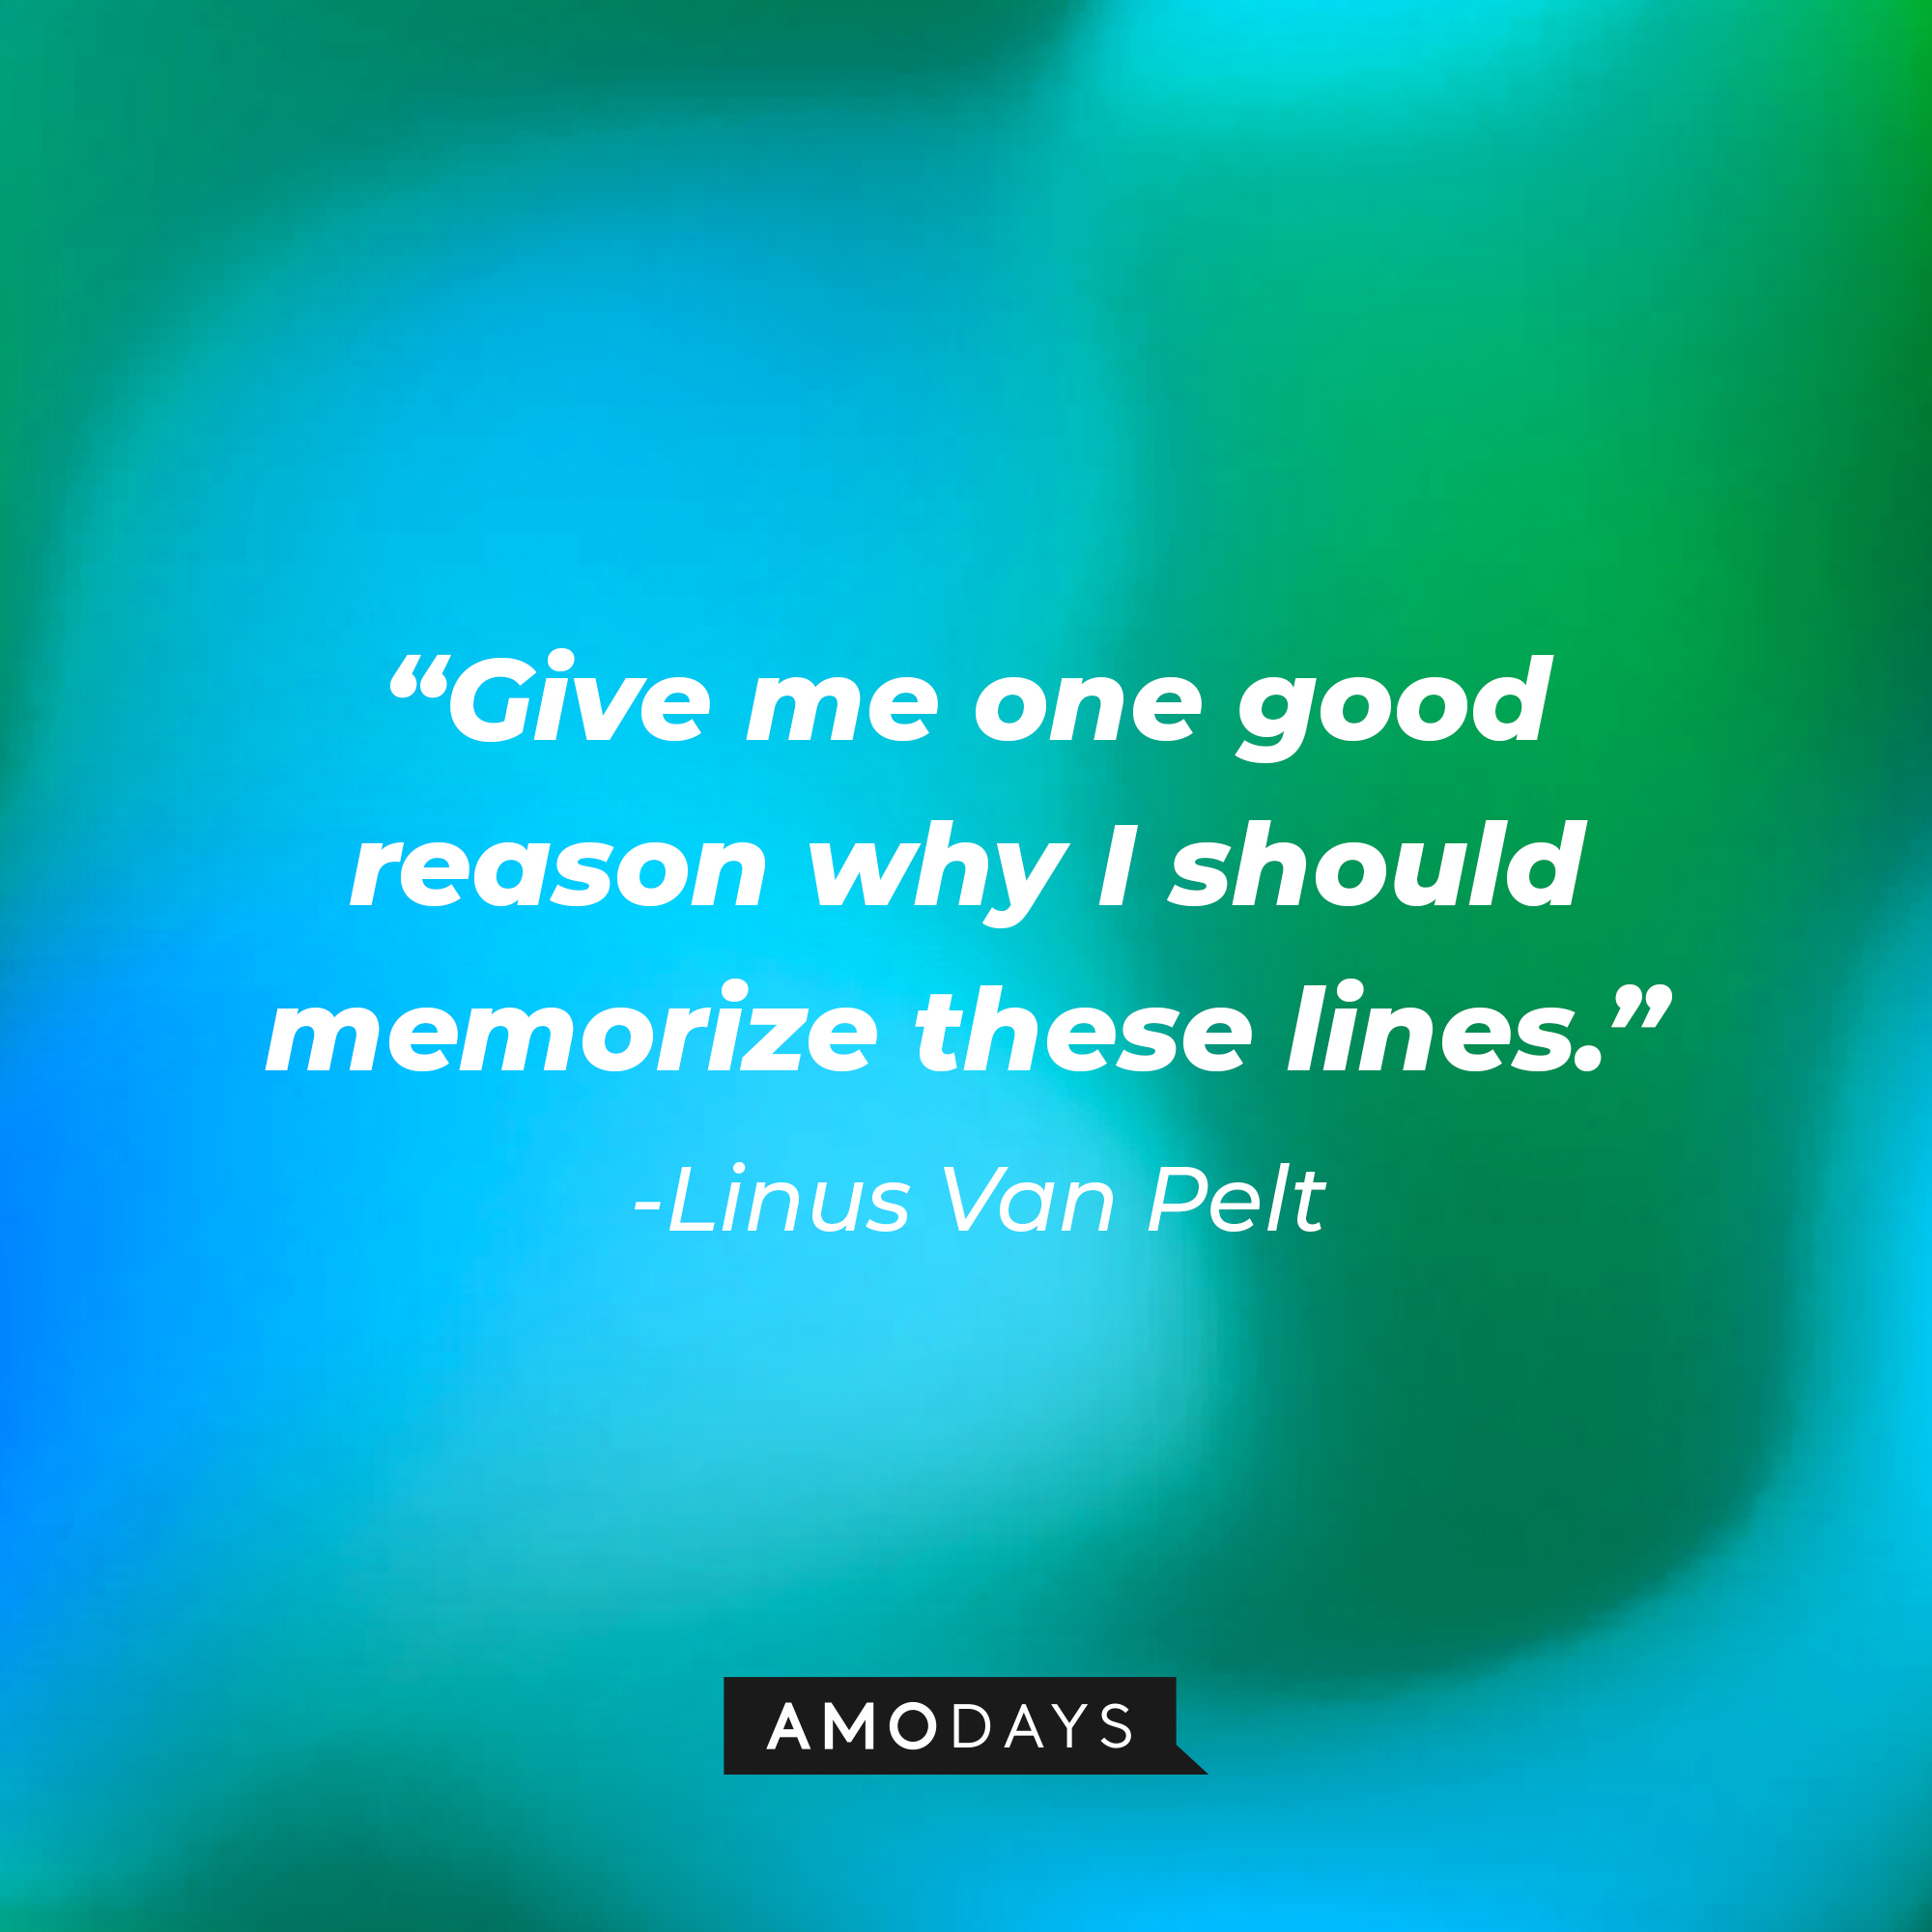 Linus Van Pelt's quote: "Give me one good reason why I should memorize these lines." | Source: Amodays